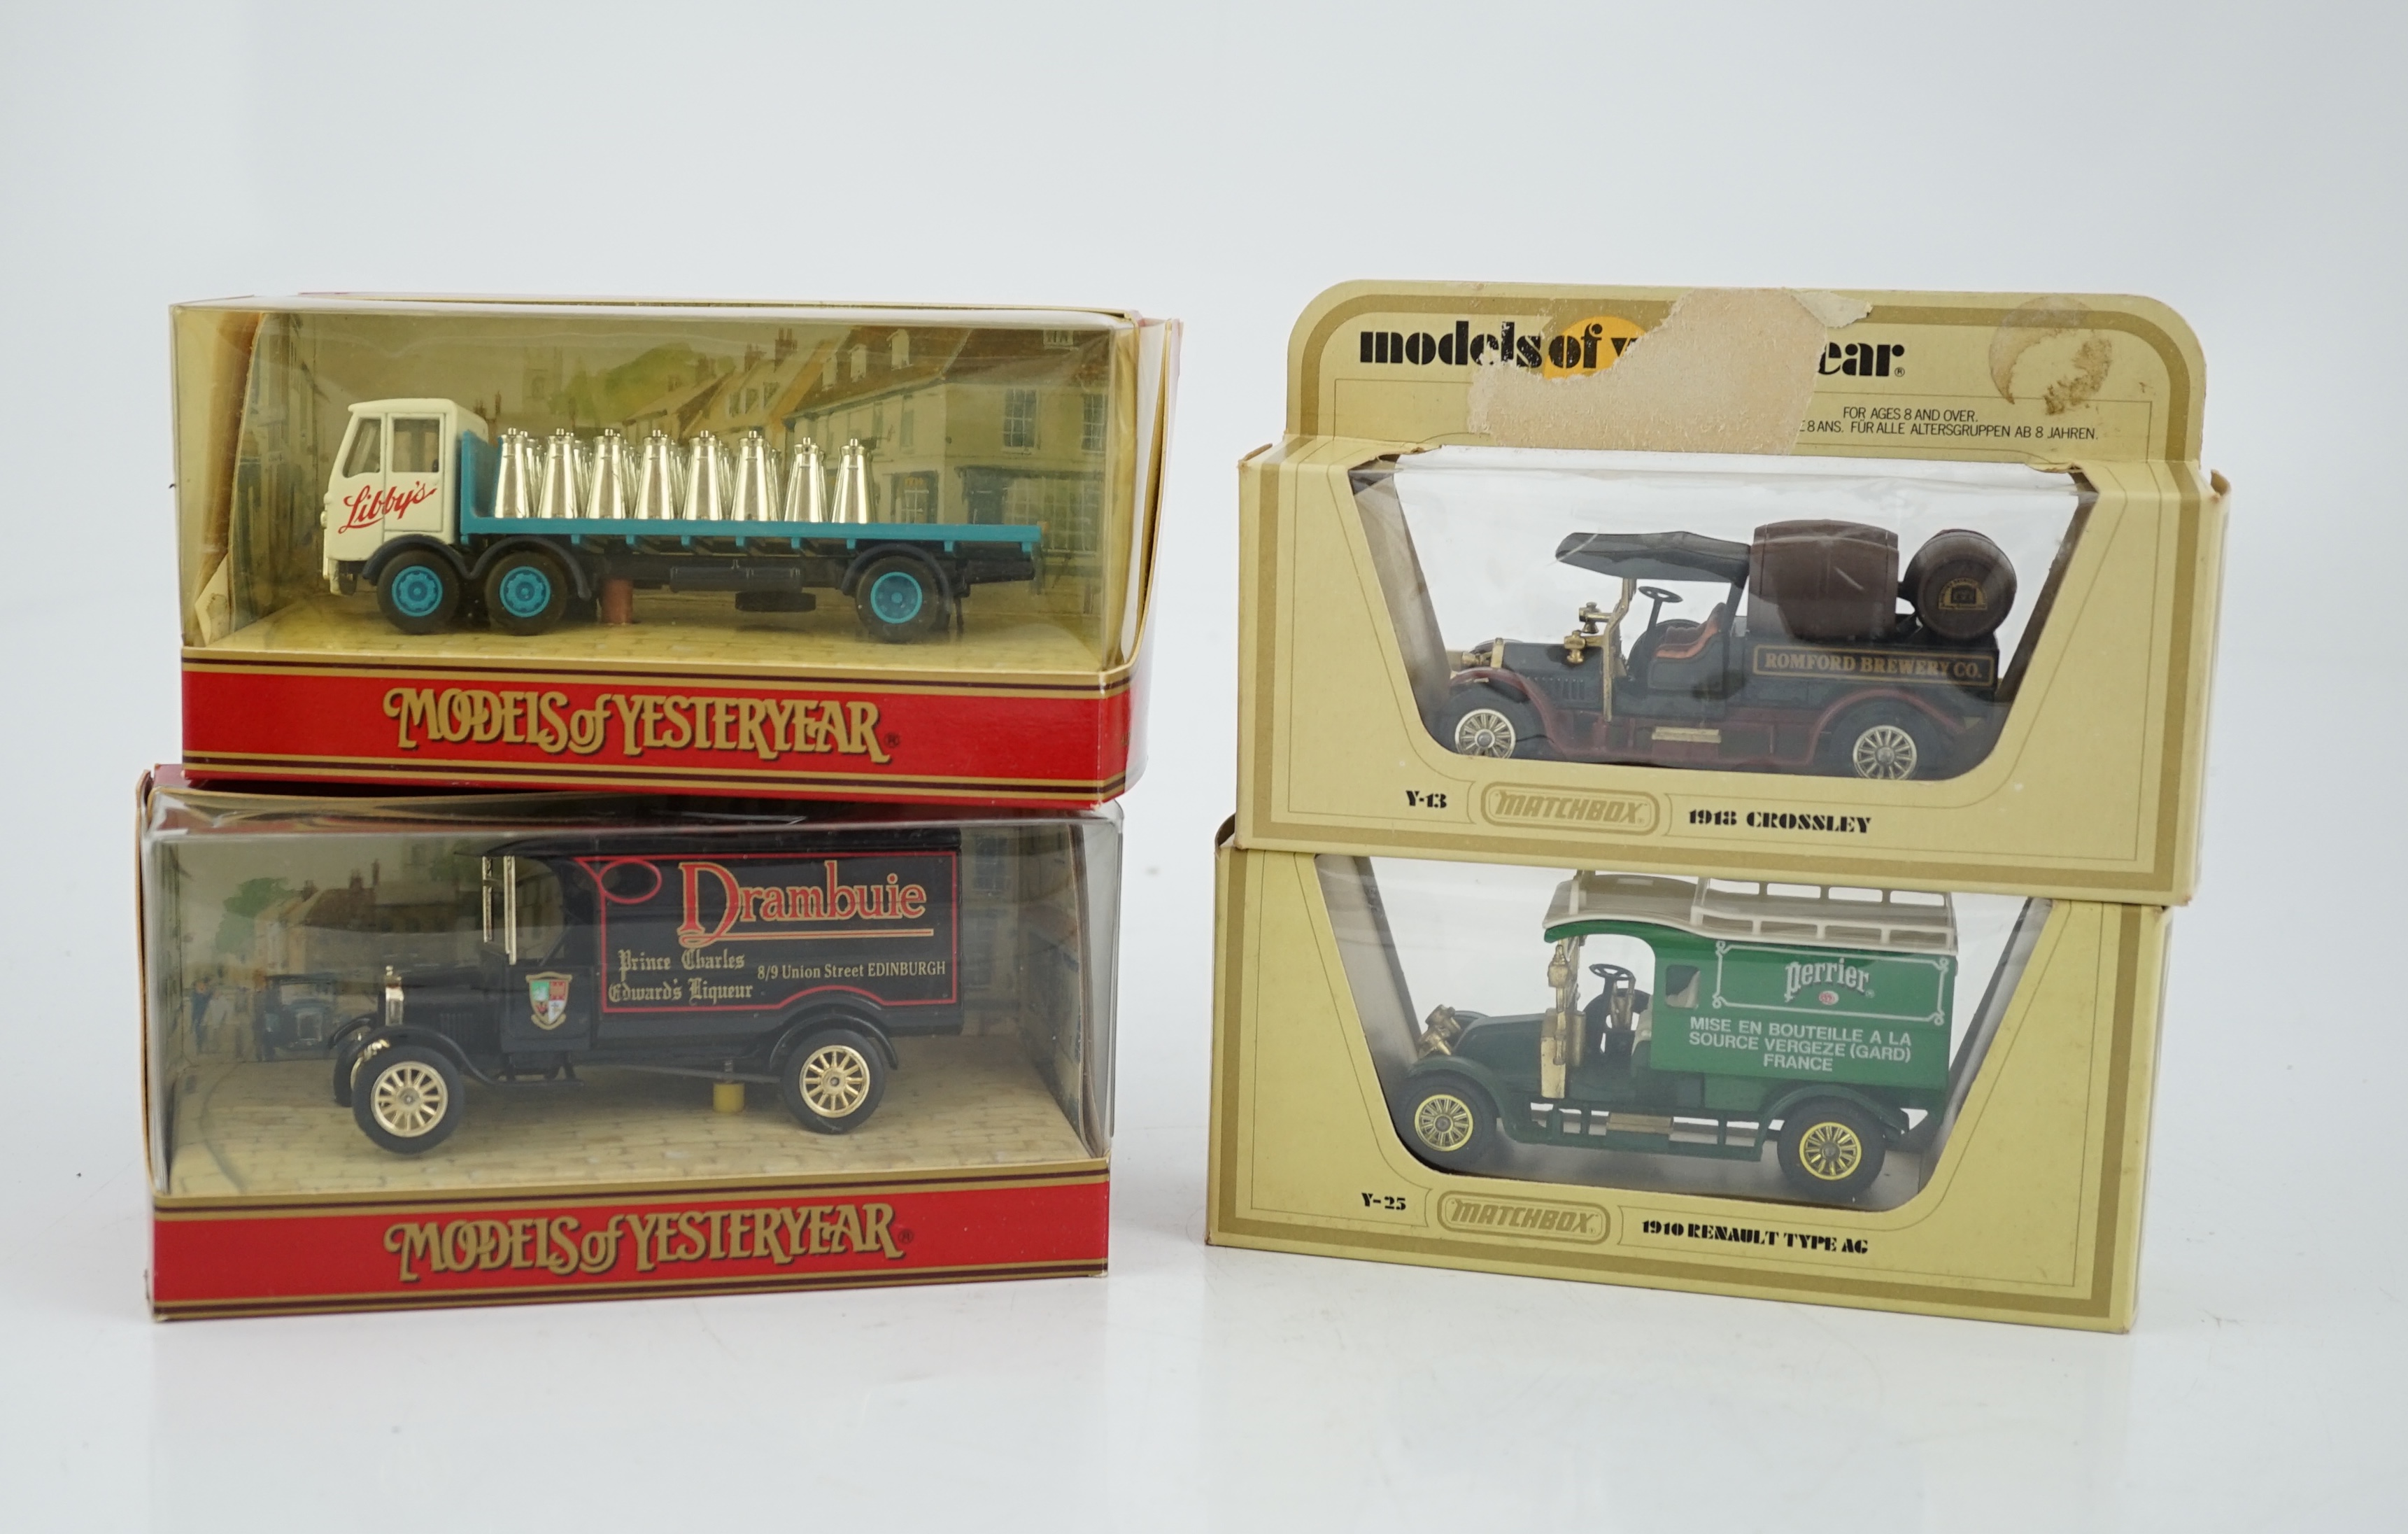 Sixty-six Matchbox Models of Yesteryear, in cream or maroon era boxes, including cars, commercial - Image 5 of 12